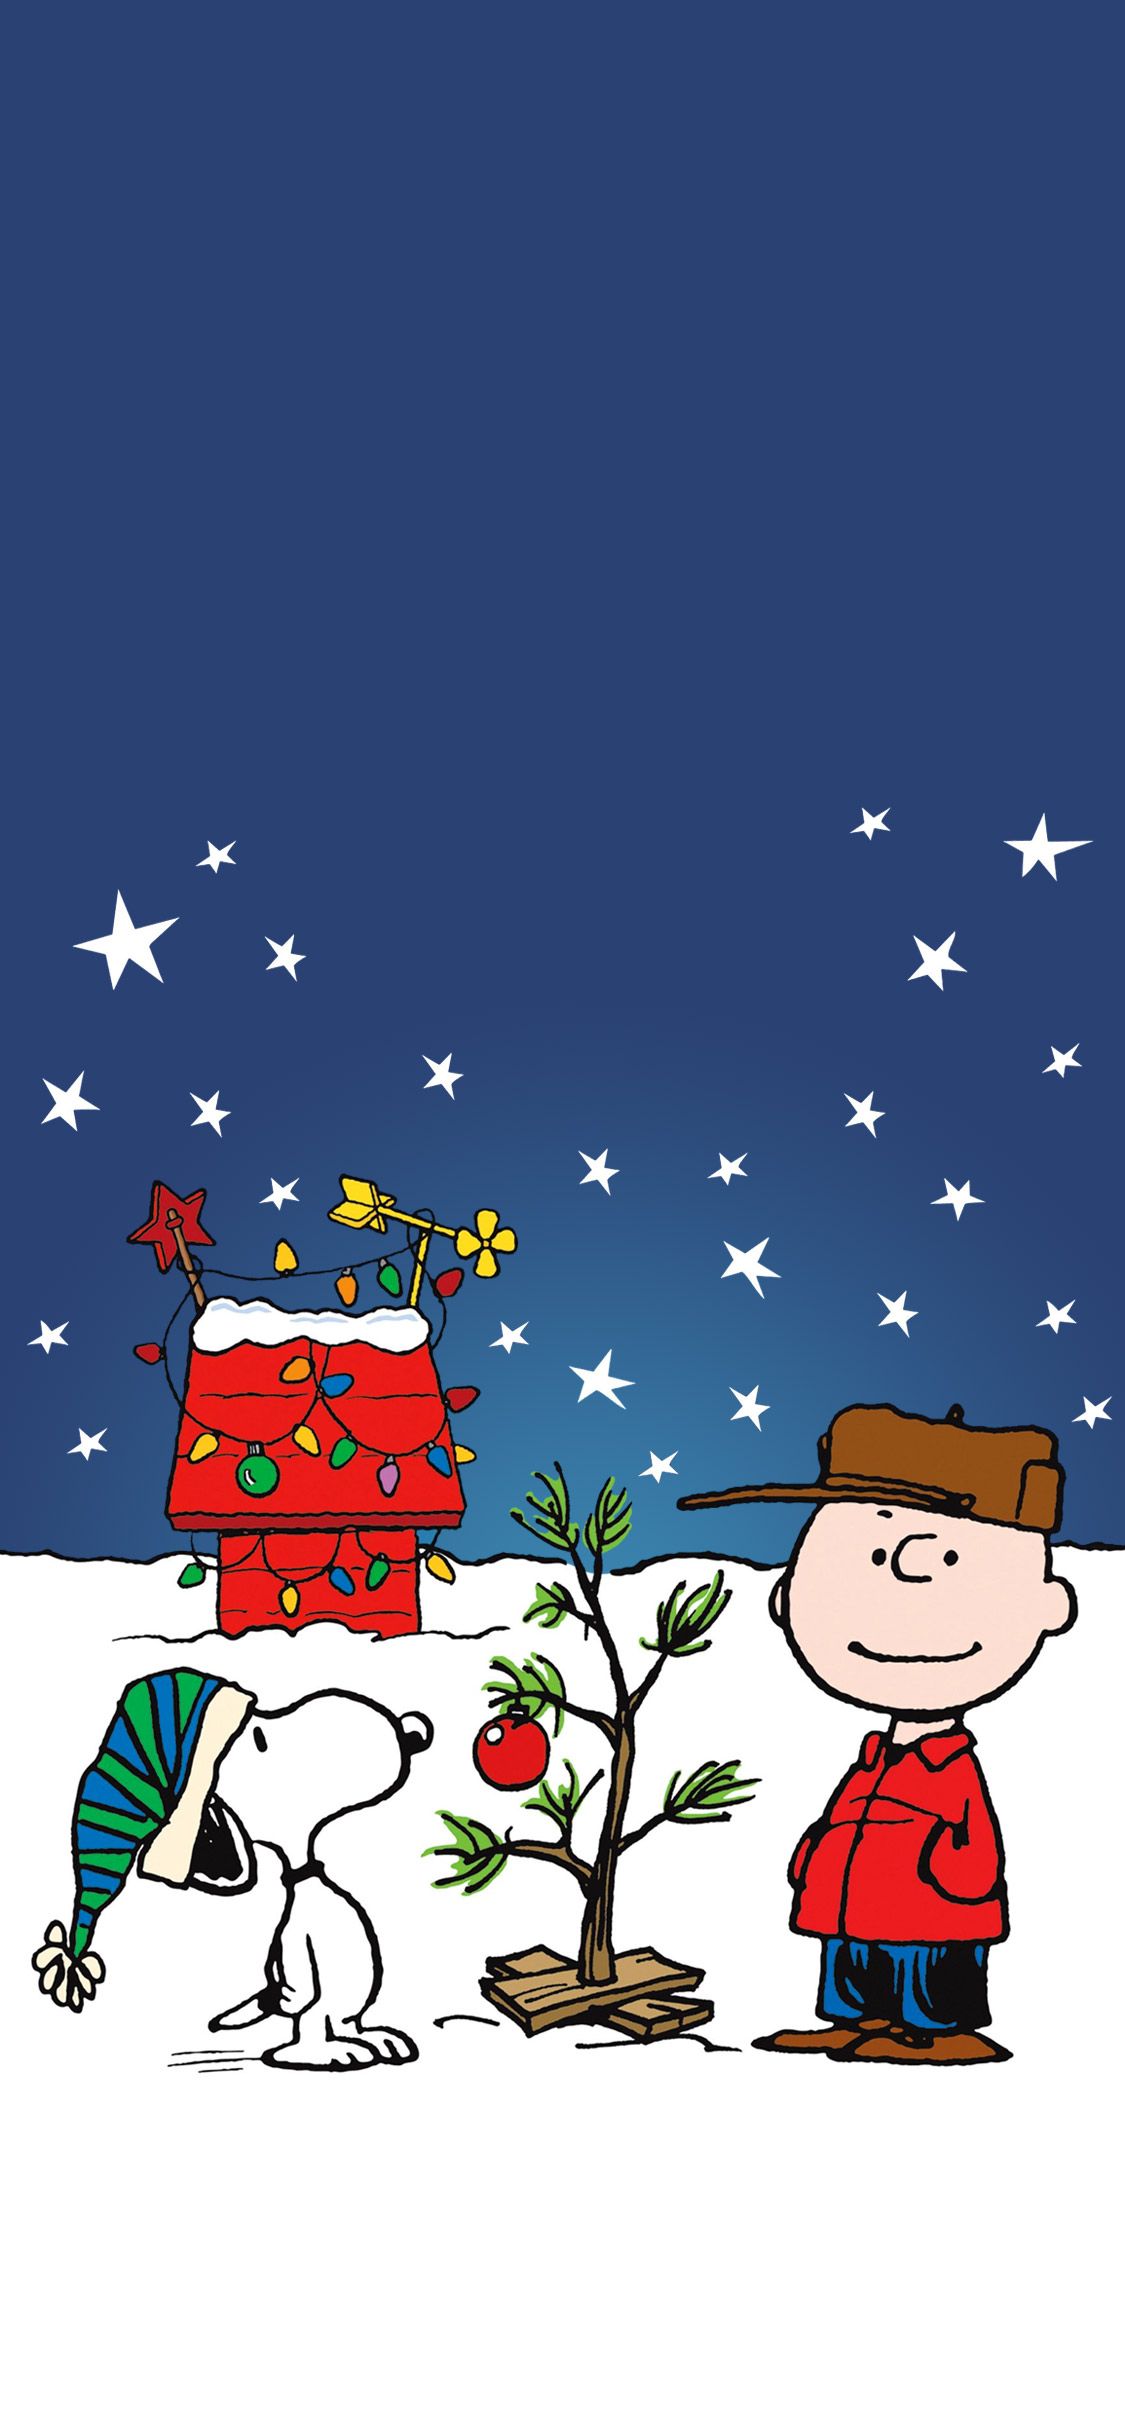 Charlie Brown Christmas iPhone Wallpaper with high-resolution 1080x1920 pixel. You can use this wallpaper for your iPhone 5, 6, 7, 8, X, XS, XR backgrounds, Mobile Screensaver, or iPad Lock Screen - Charlie Brown